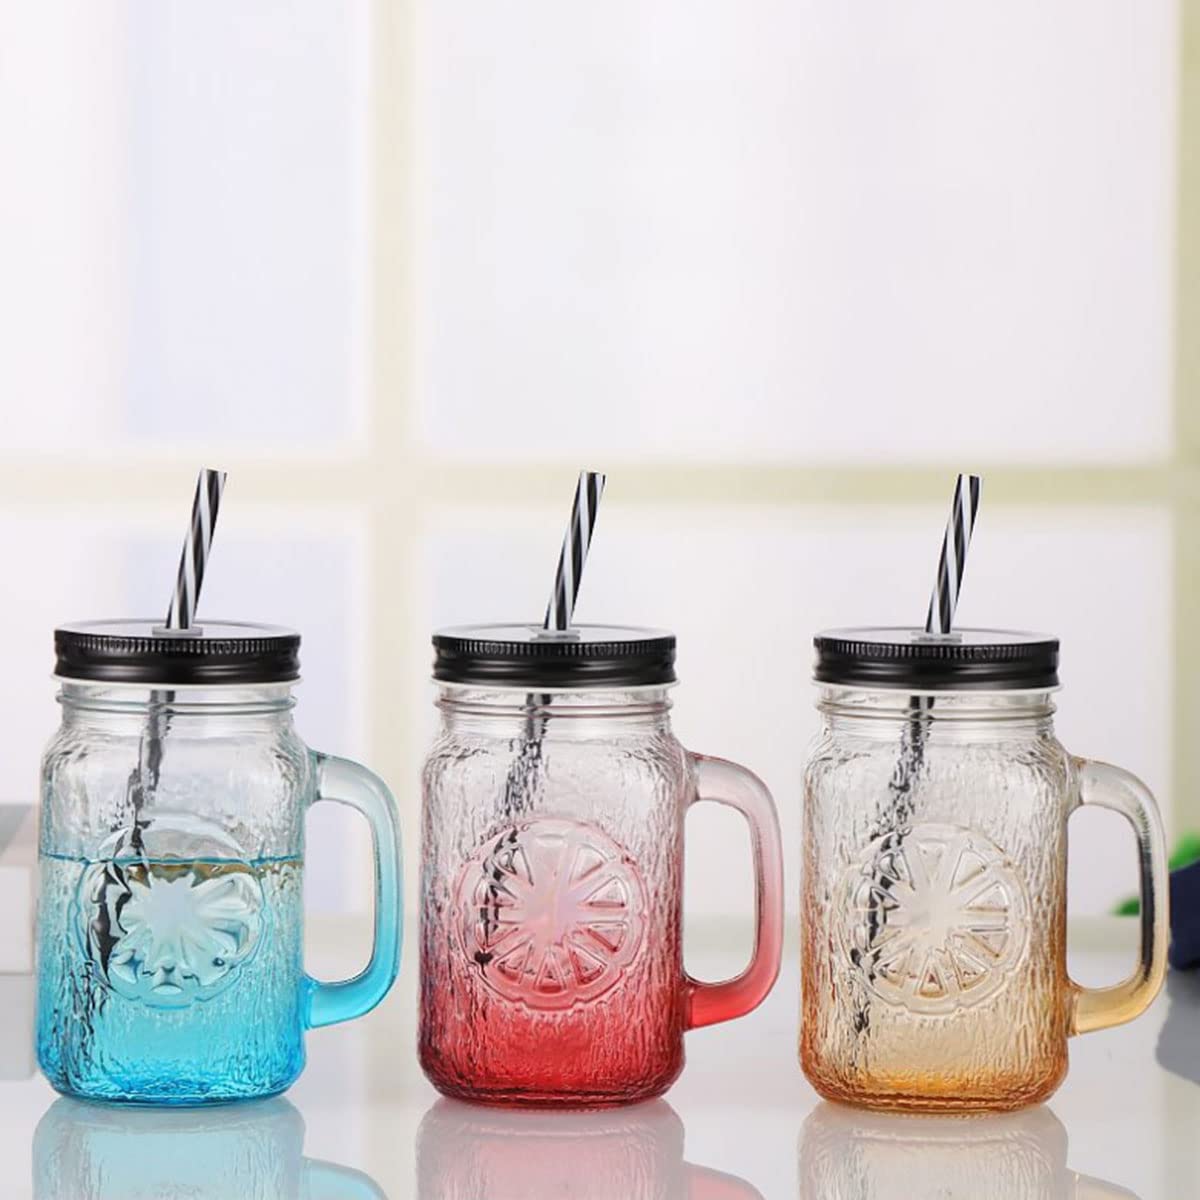 HwaGui - Cute Clear Glass Cups With Lid And Straw For Iced Coffee Cup, Tumbler Cup, Reusable Cup, Glass Drinking Jars For Iced Tea And Coffee, Red Drinking Jar 500ml/17.0oz